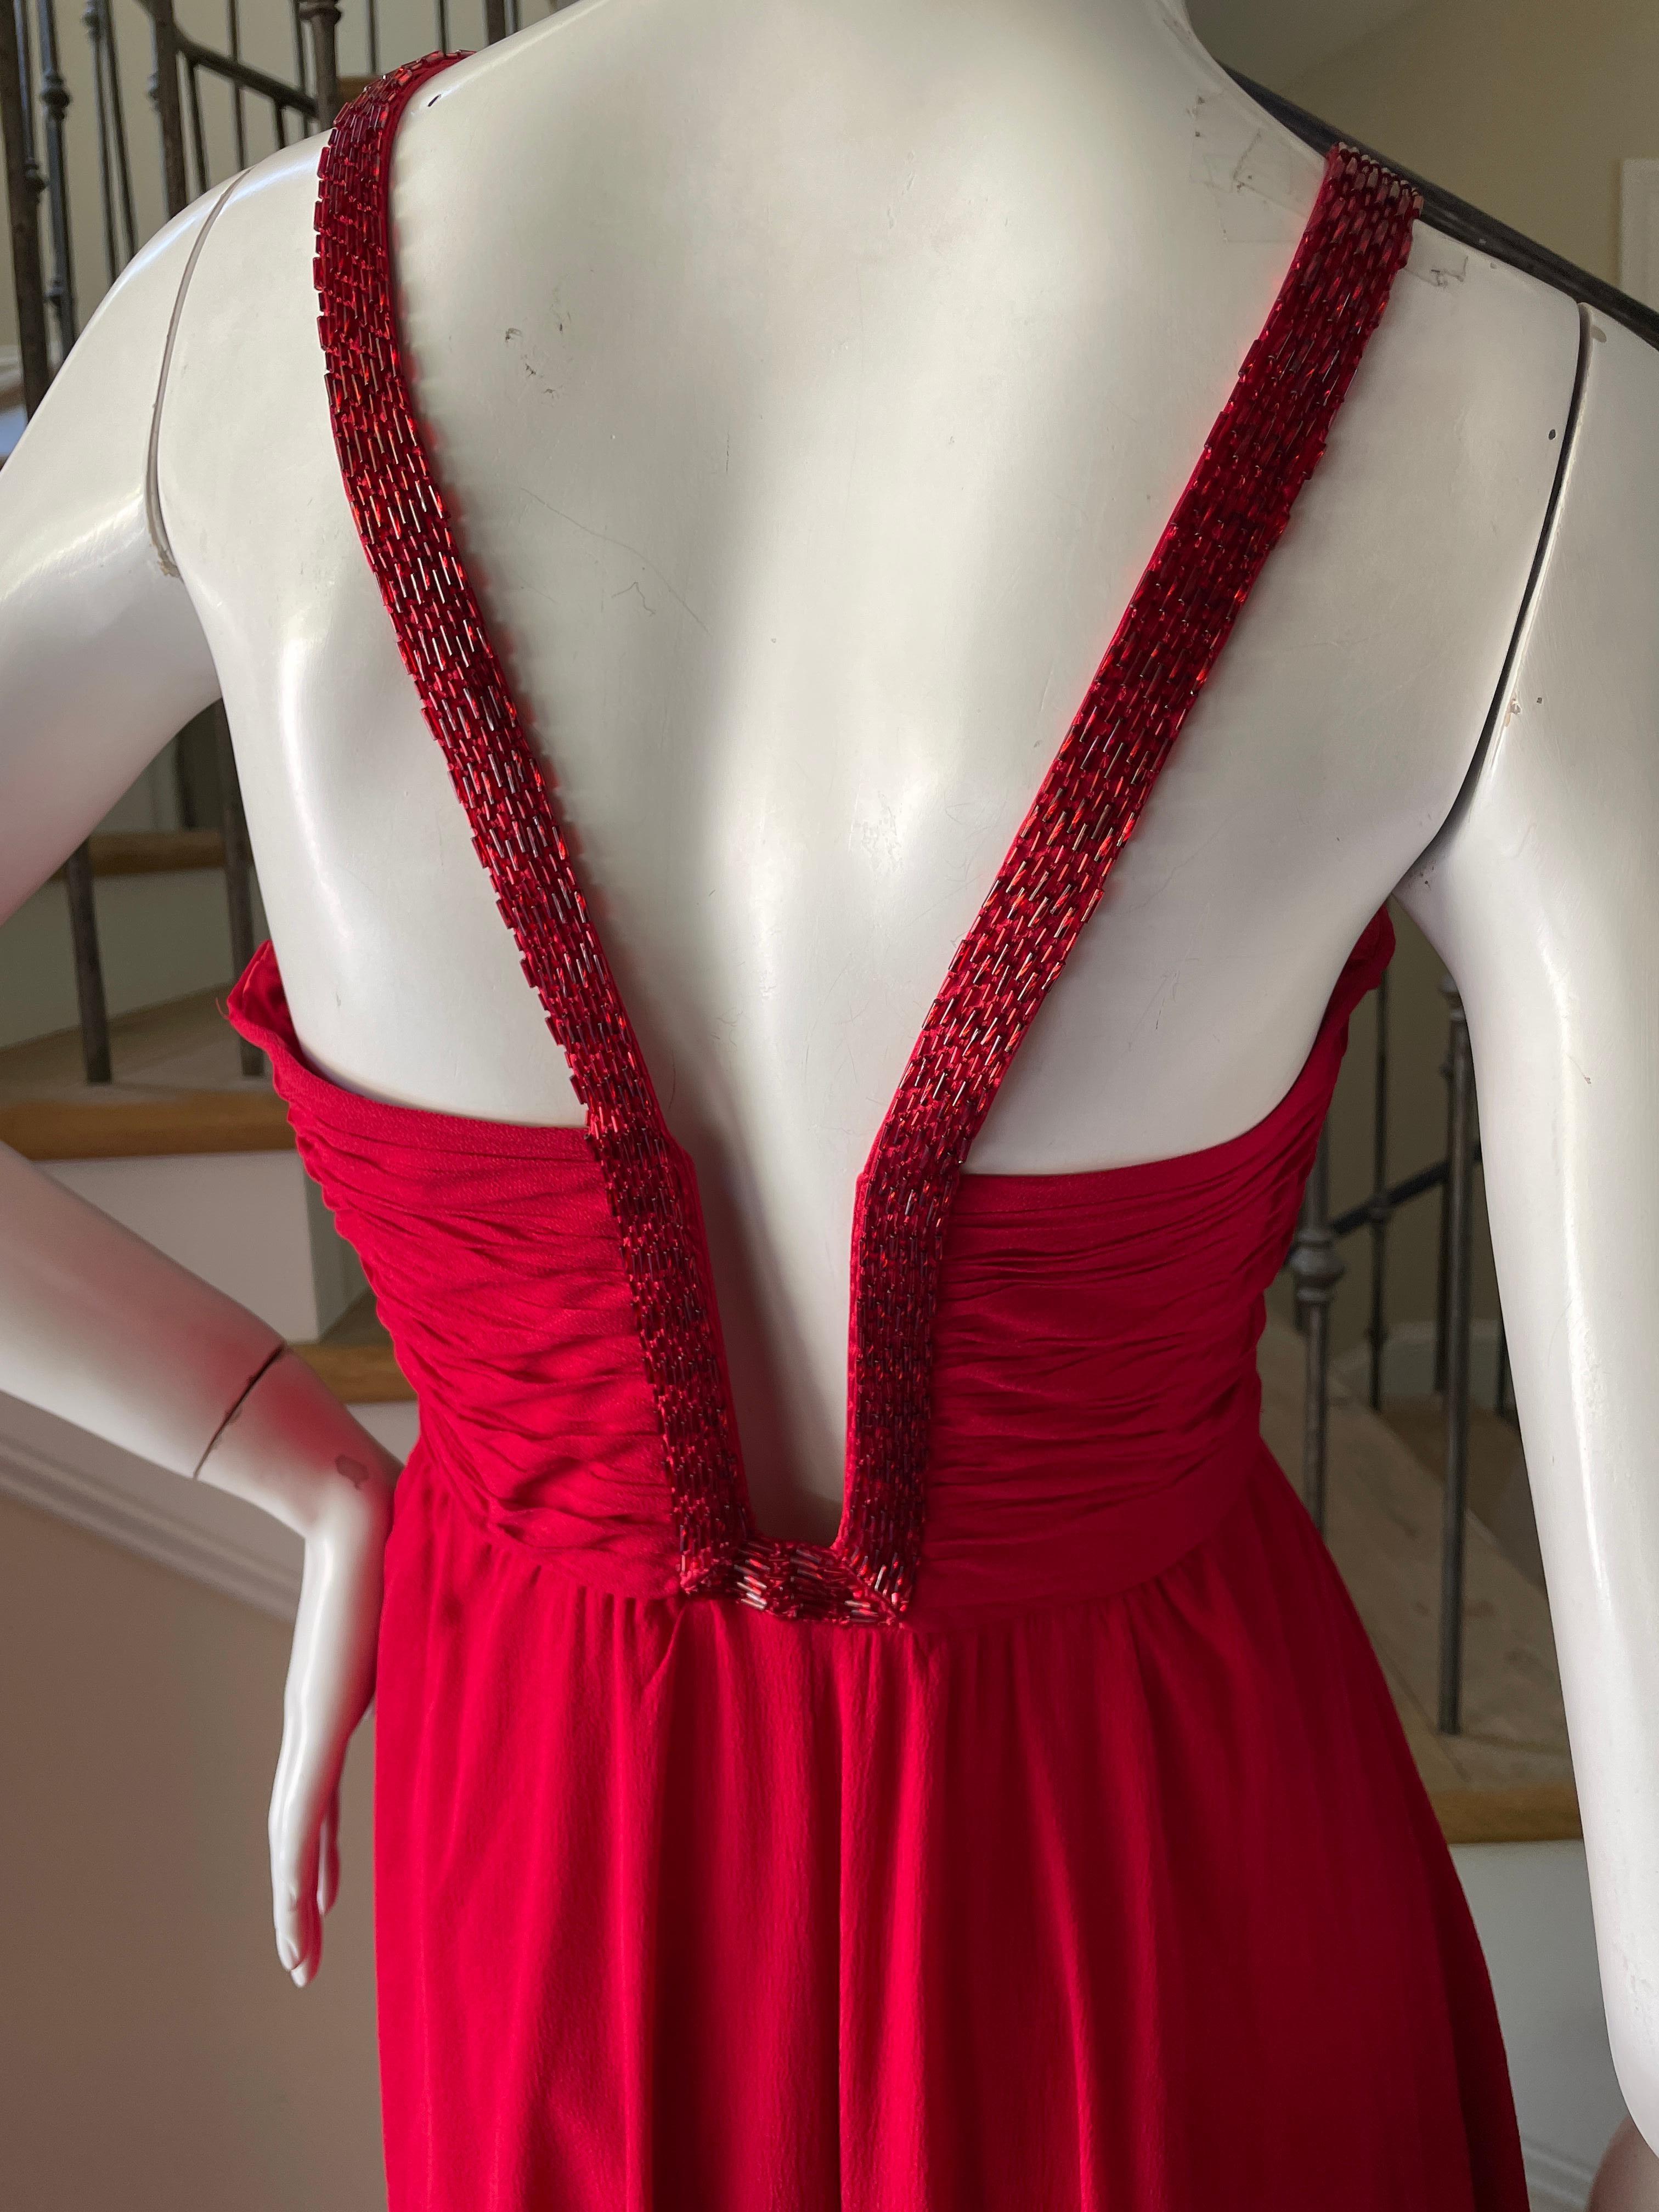 Roberto Cavalli Vintage Coral Red Silk Evening Dress with Keyhole Beaded Details For Sale 3